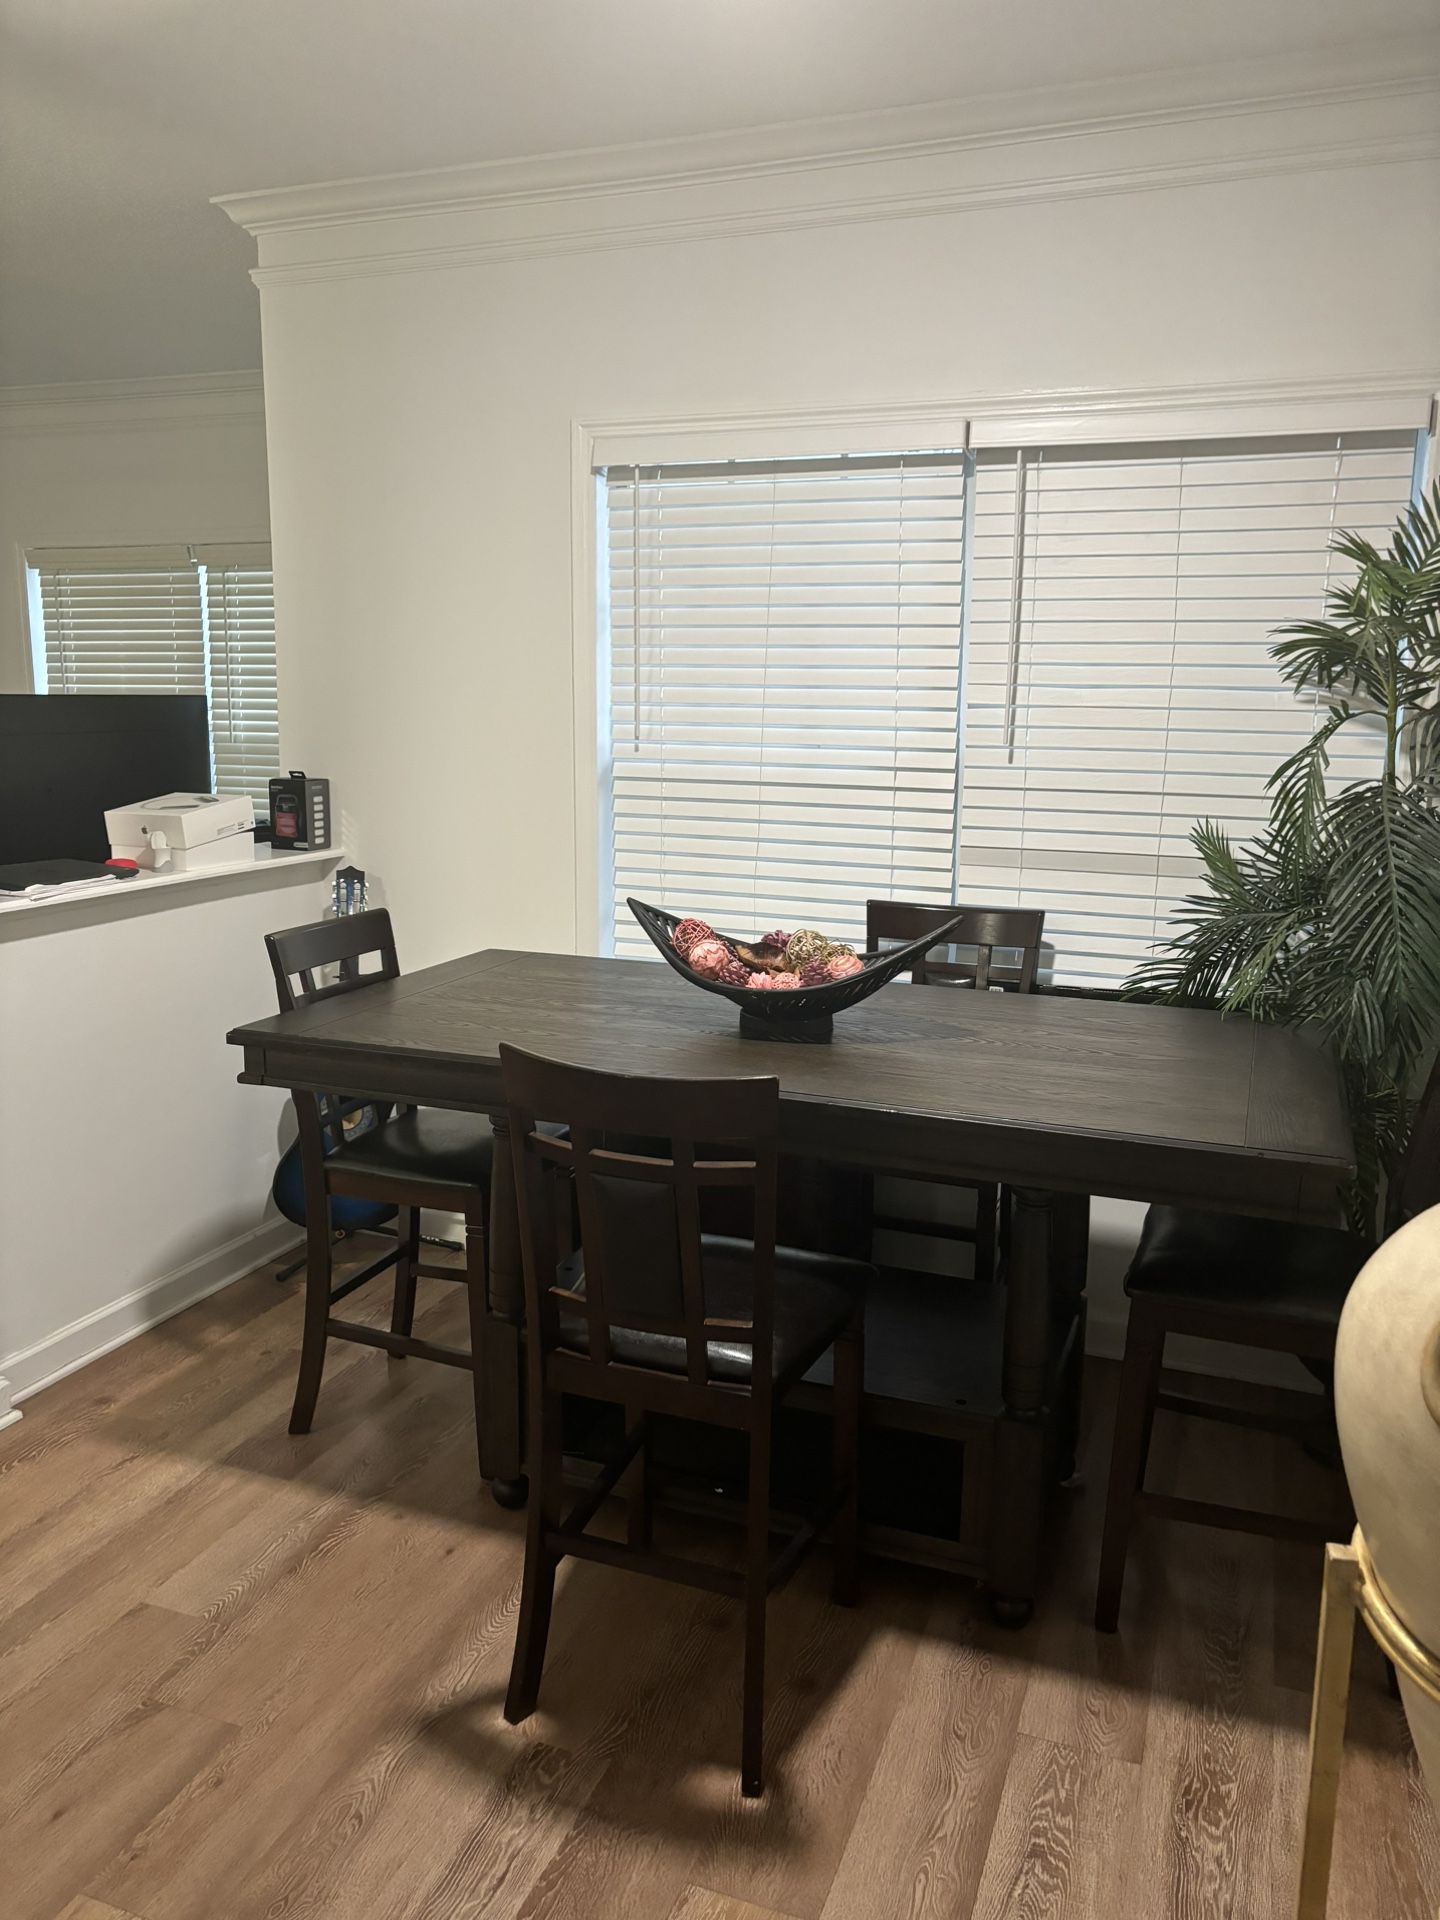 5 Pc Dining Room Set For $600